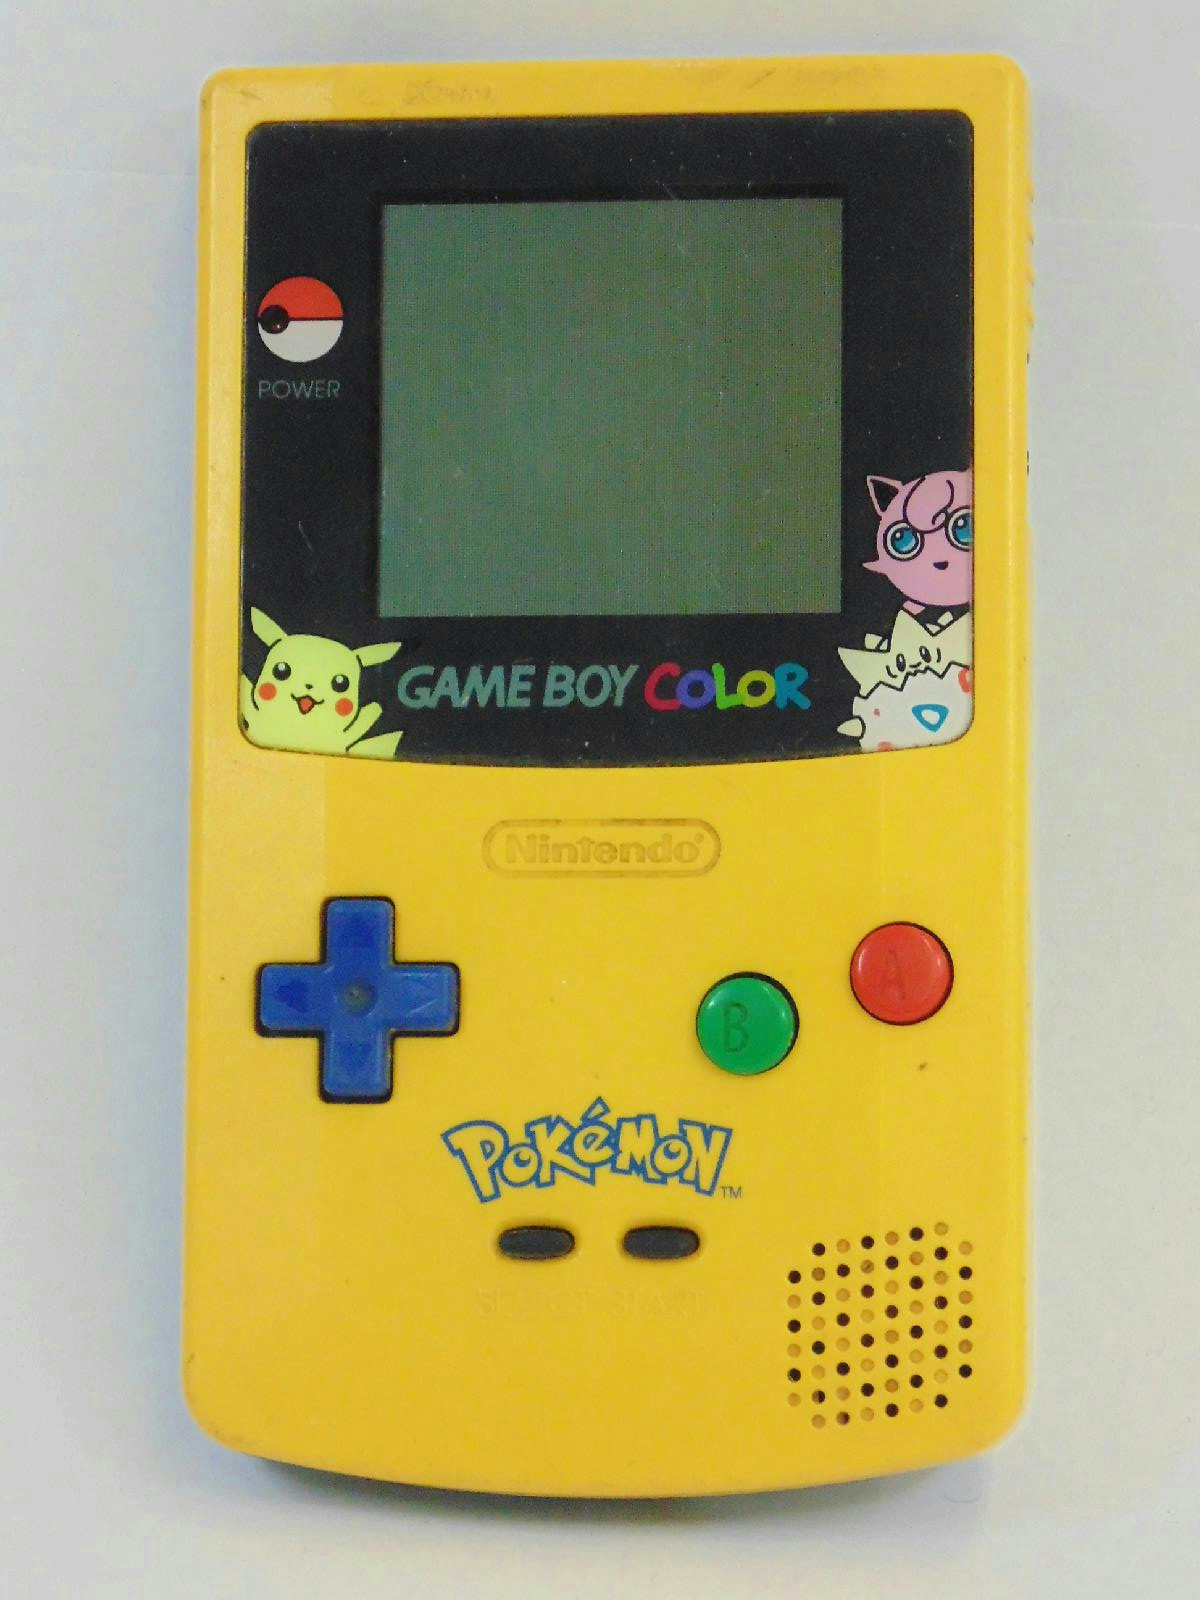 The Best Game Boy Color Colors Ranked Polygon